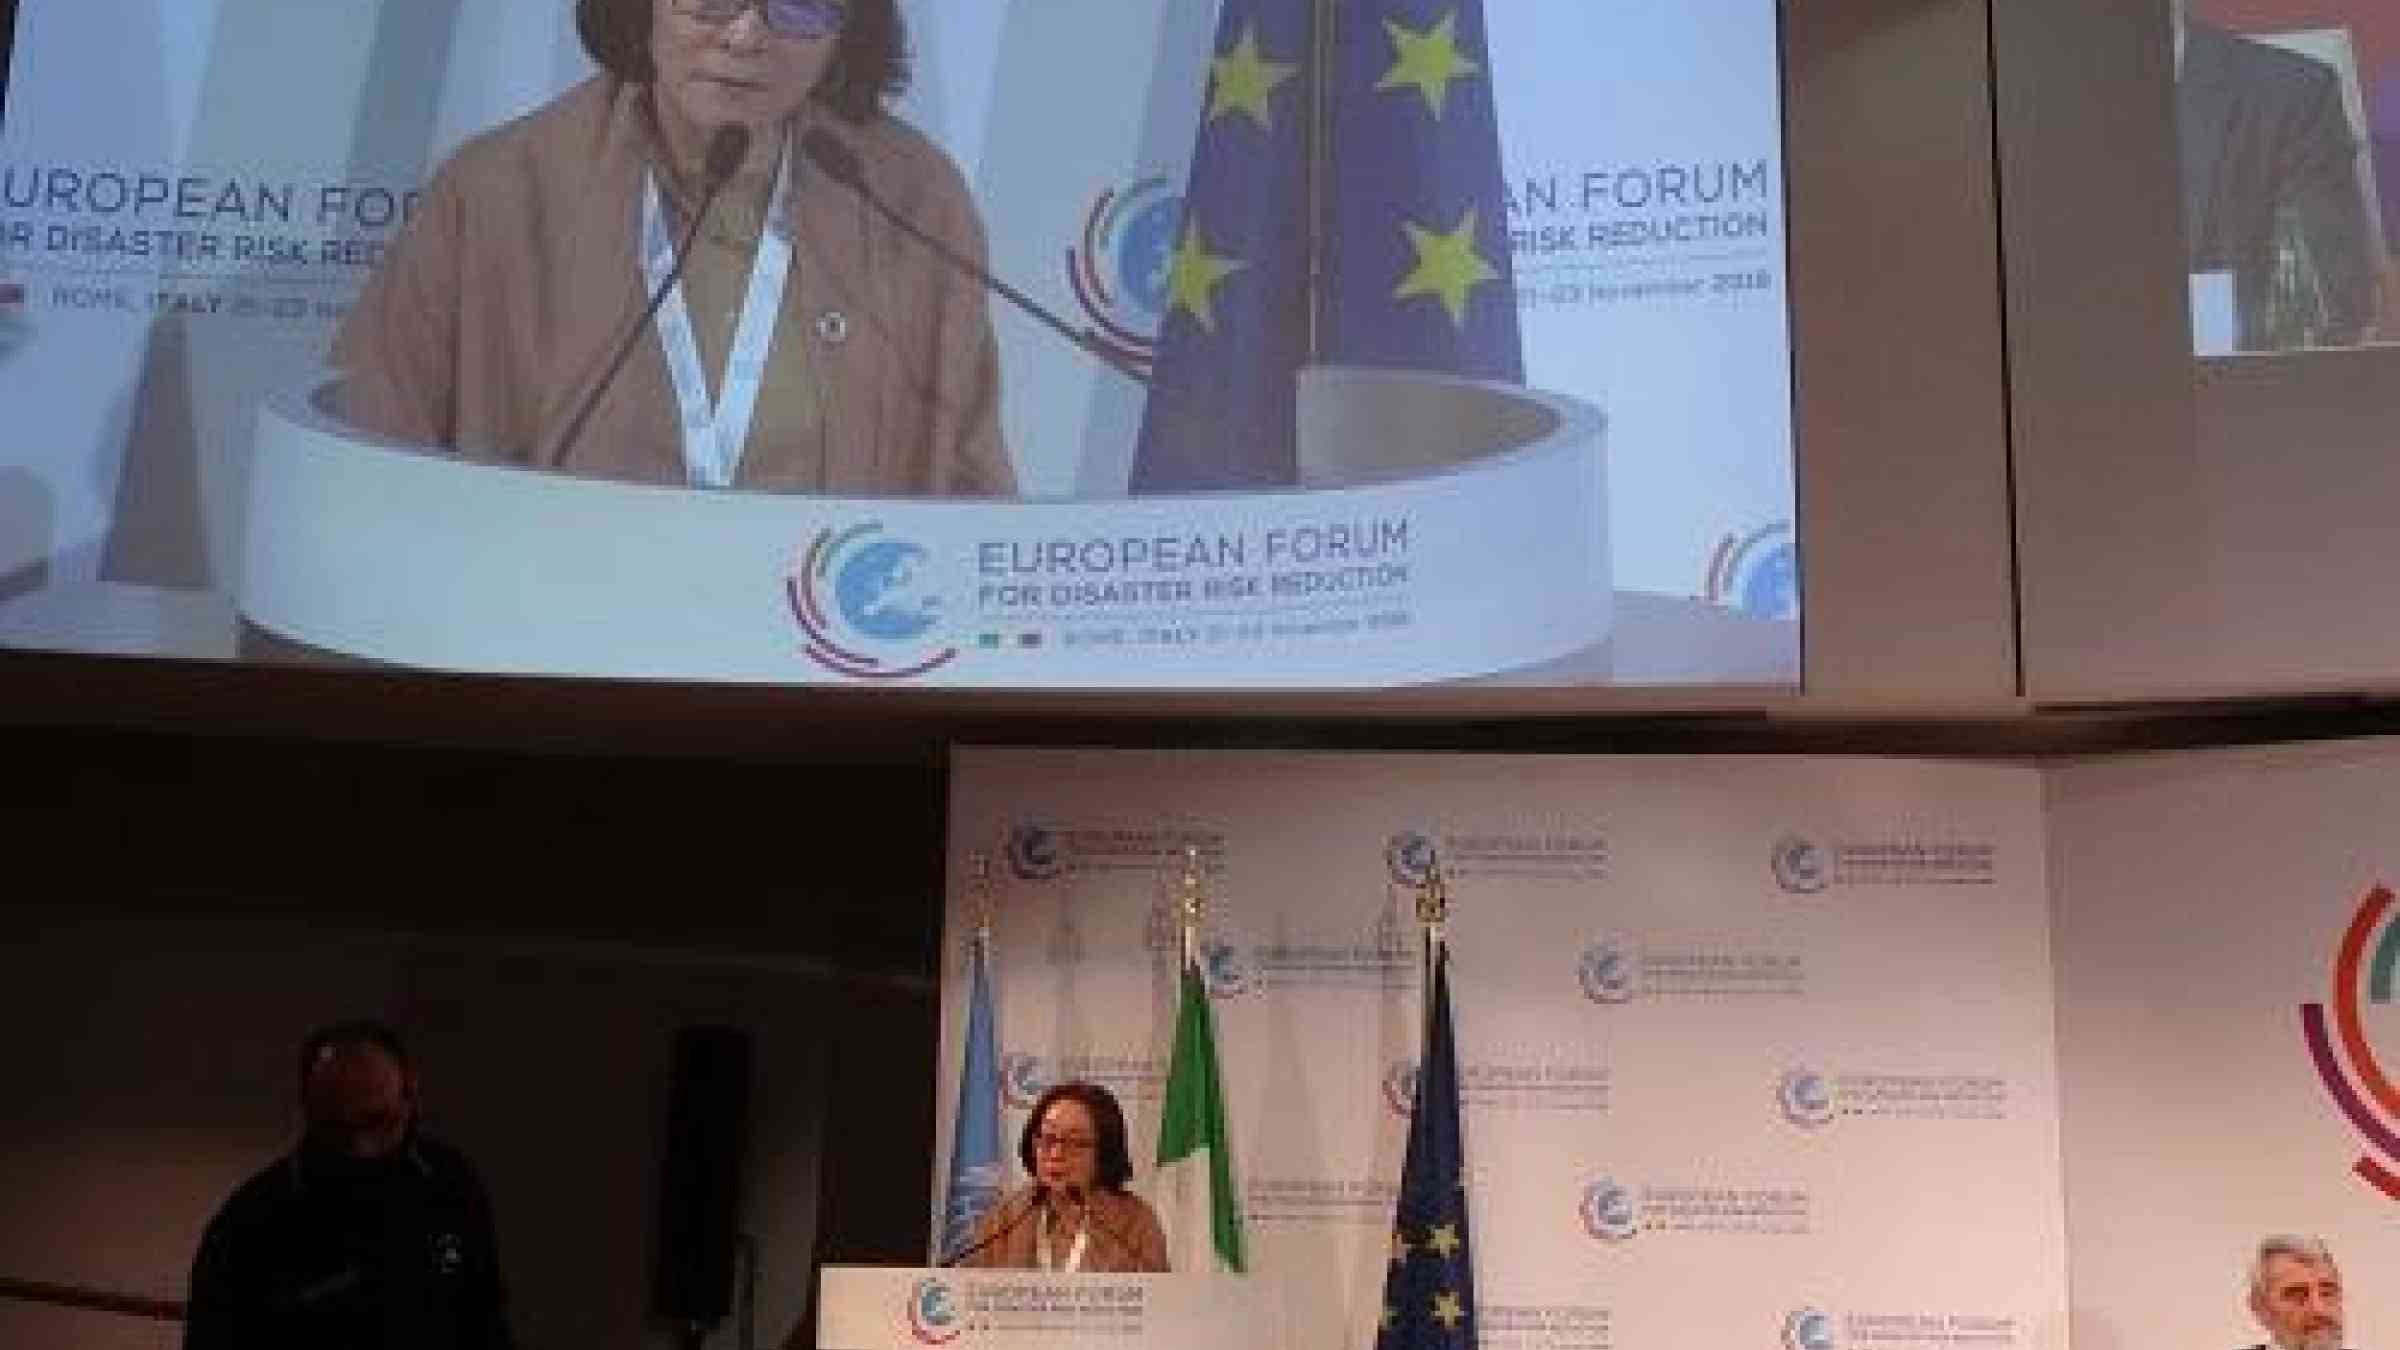 UNISDR head, Mami Mizutori, addressing the closing ceremony today of the European Forum for Disaster Risk Reduction